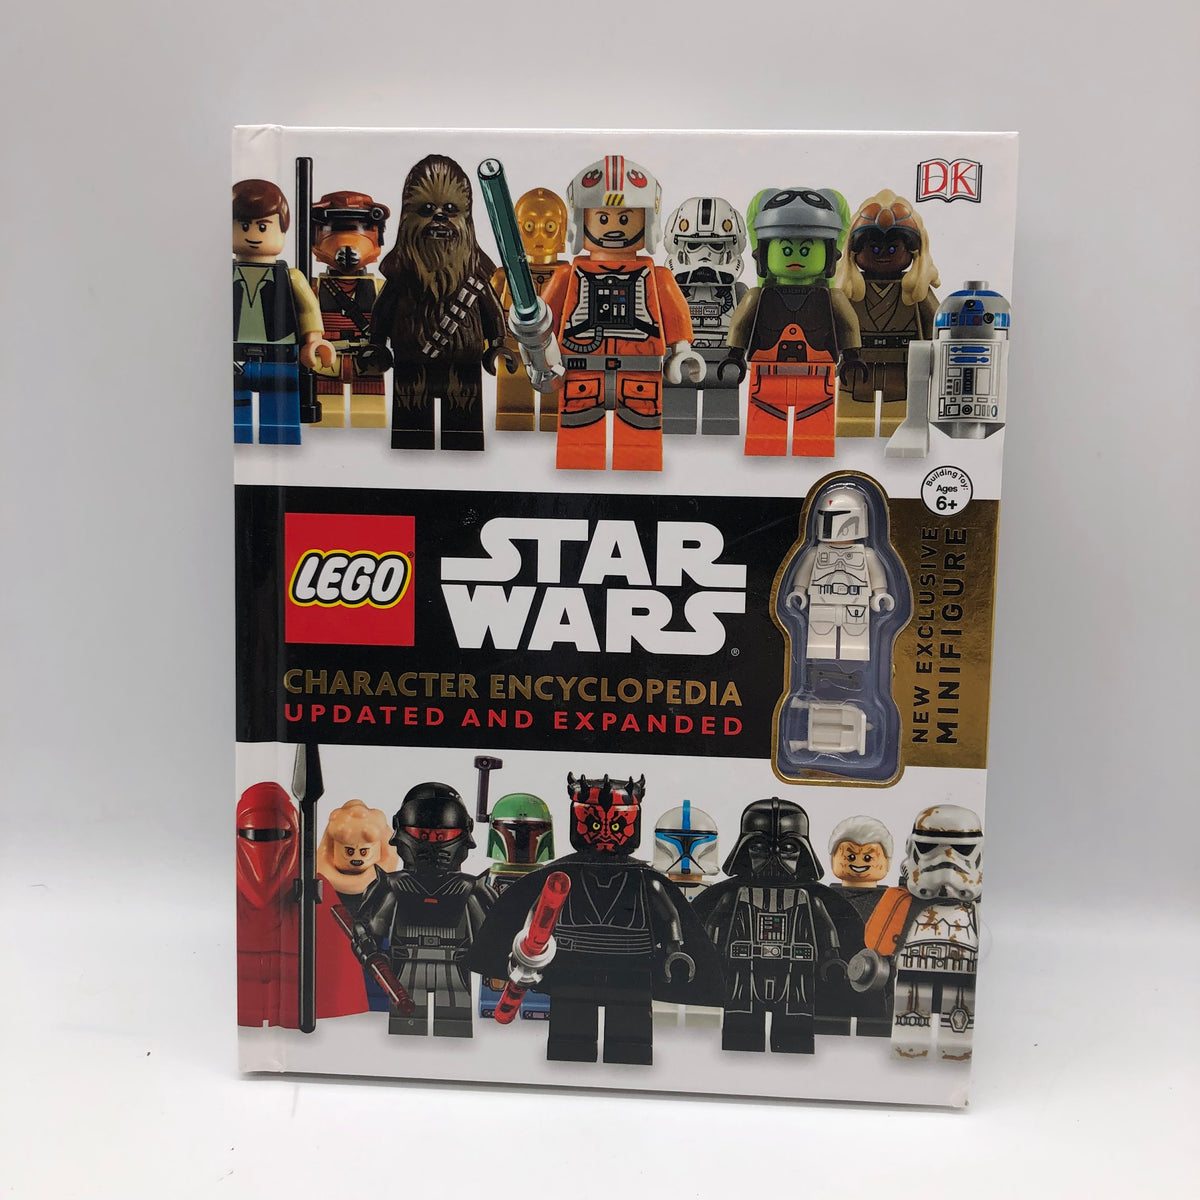 Bricks　Minifigs　and　Wars　Star　Encyclopedia:　[NEW]　–　Updated　Expanded　Character　LEGO　Eugene